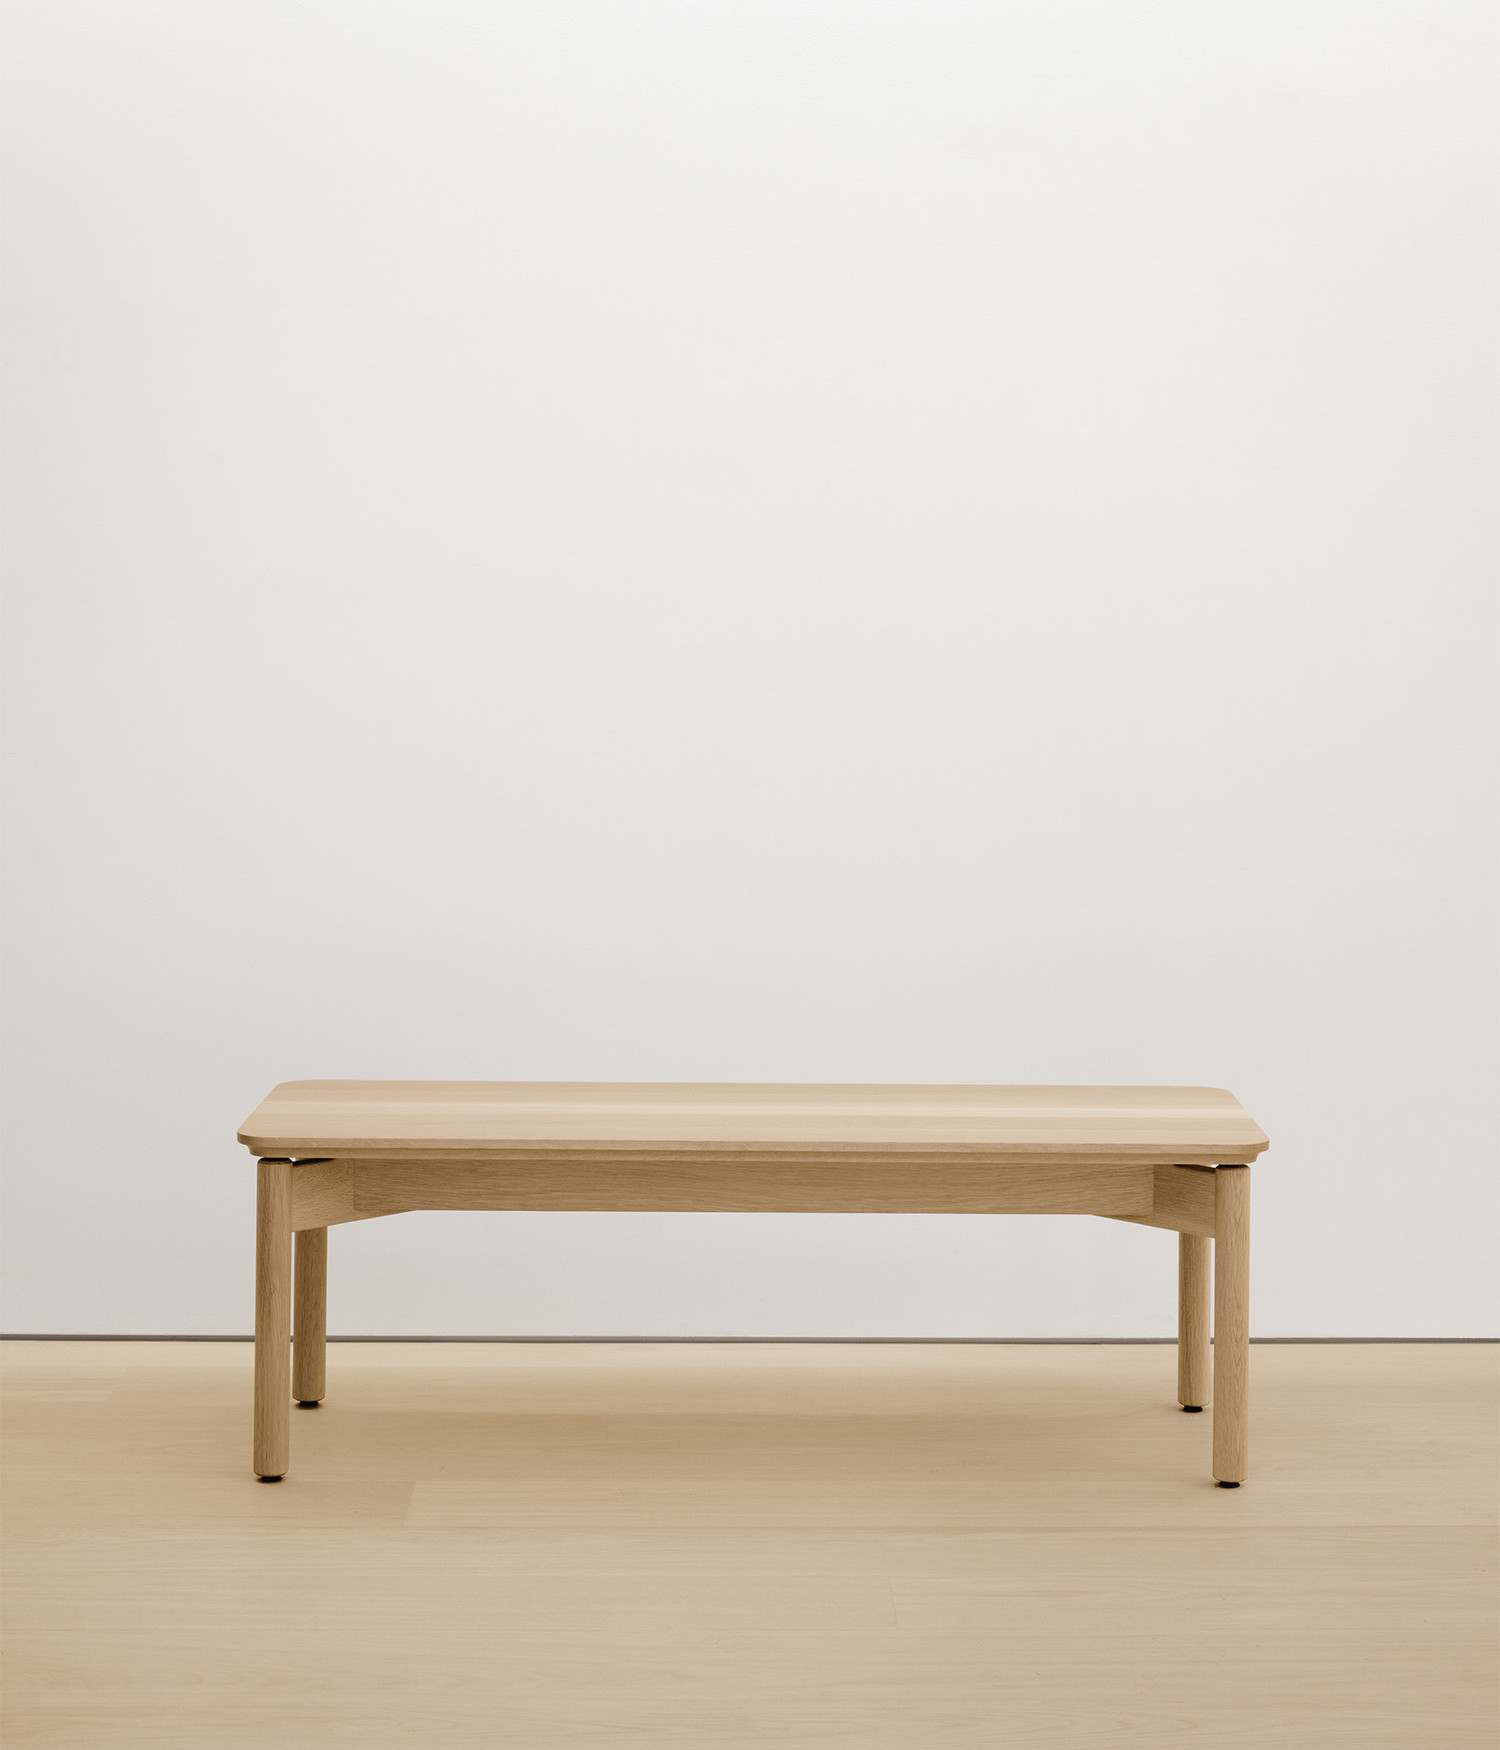 white-oak bench with wood seat